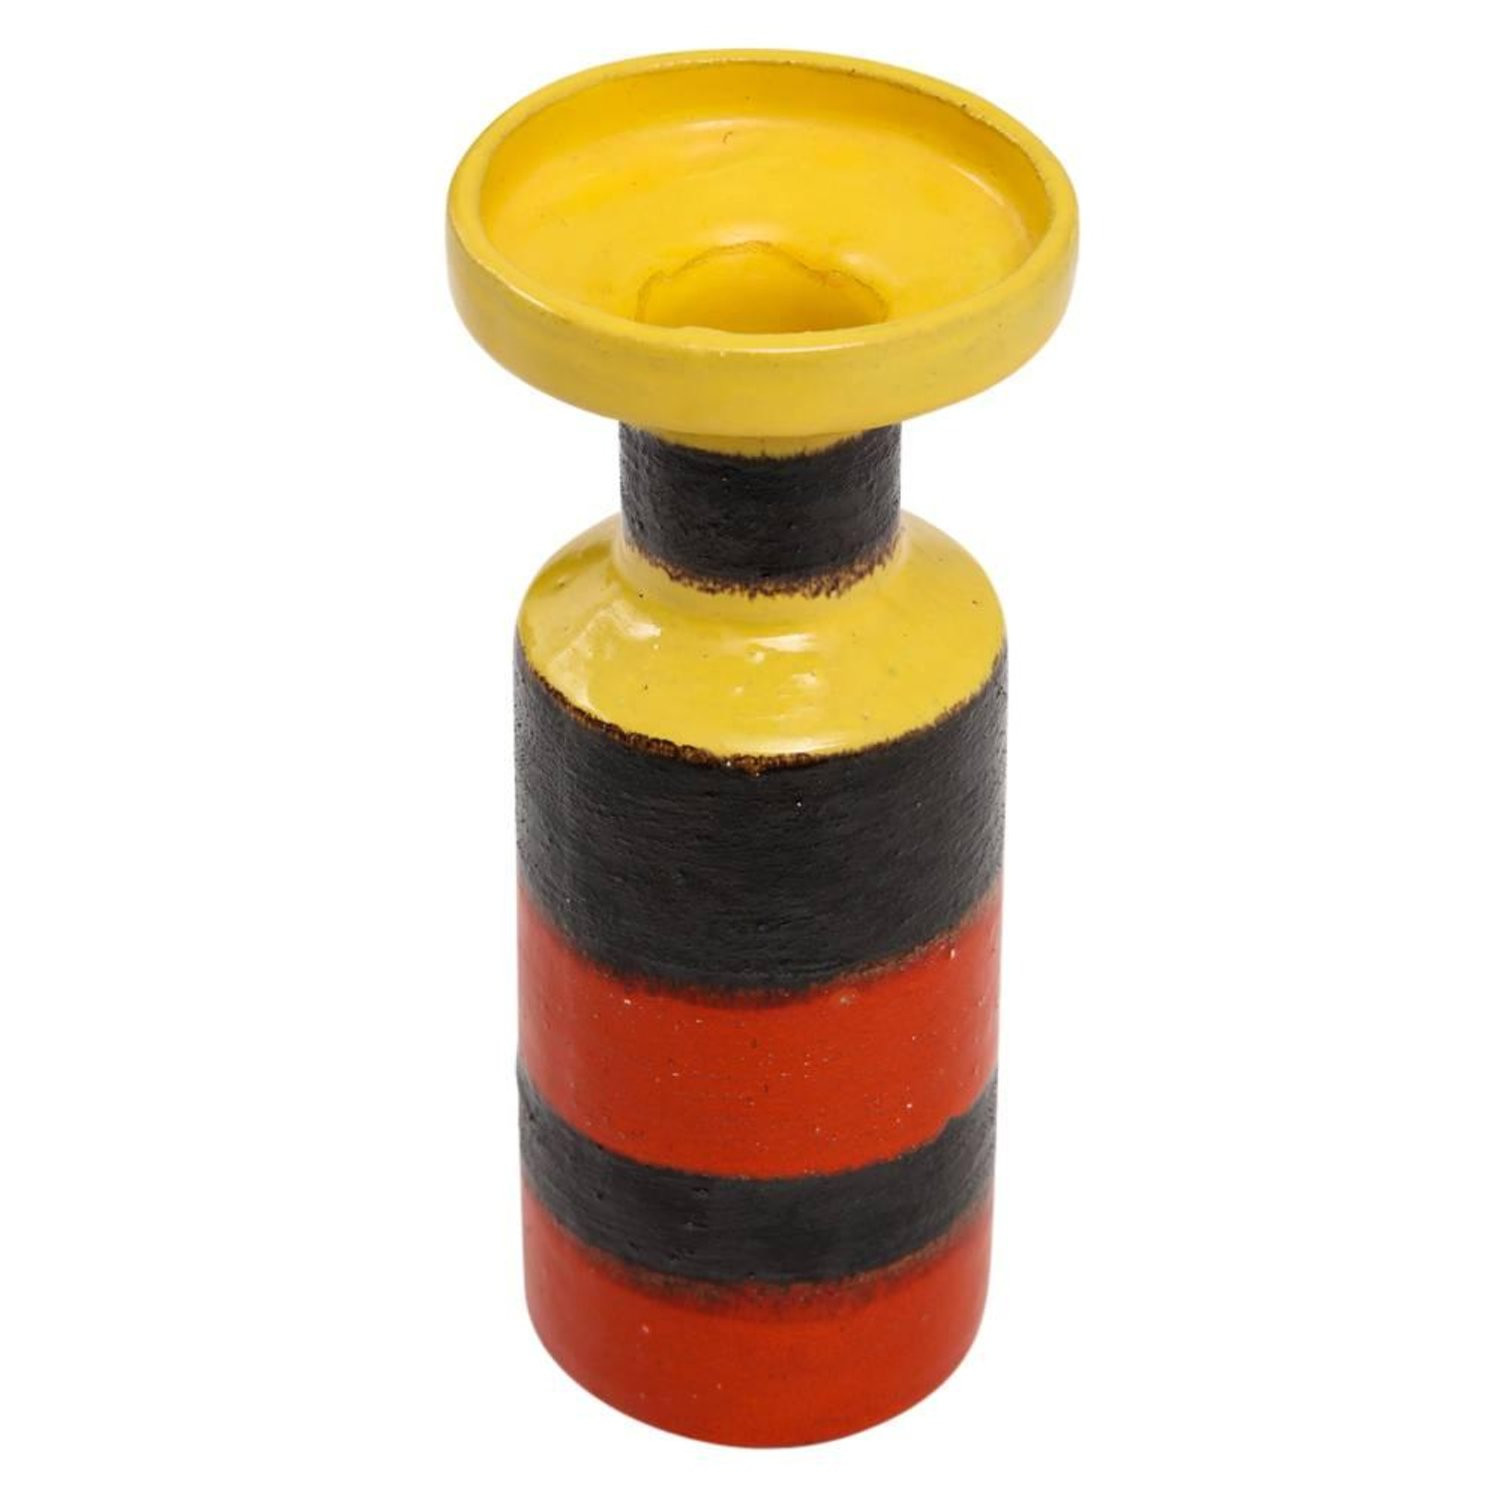 19 Lovely Cheap Black Glass Vases 2024 free download cheap black glass vases of bitossi ceramic vase pottery stripes yellow red black signed italy with regard to bitossi ceramic vase pottery stripes yellow red black signed italy 1960s for sale